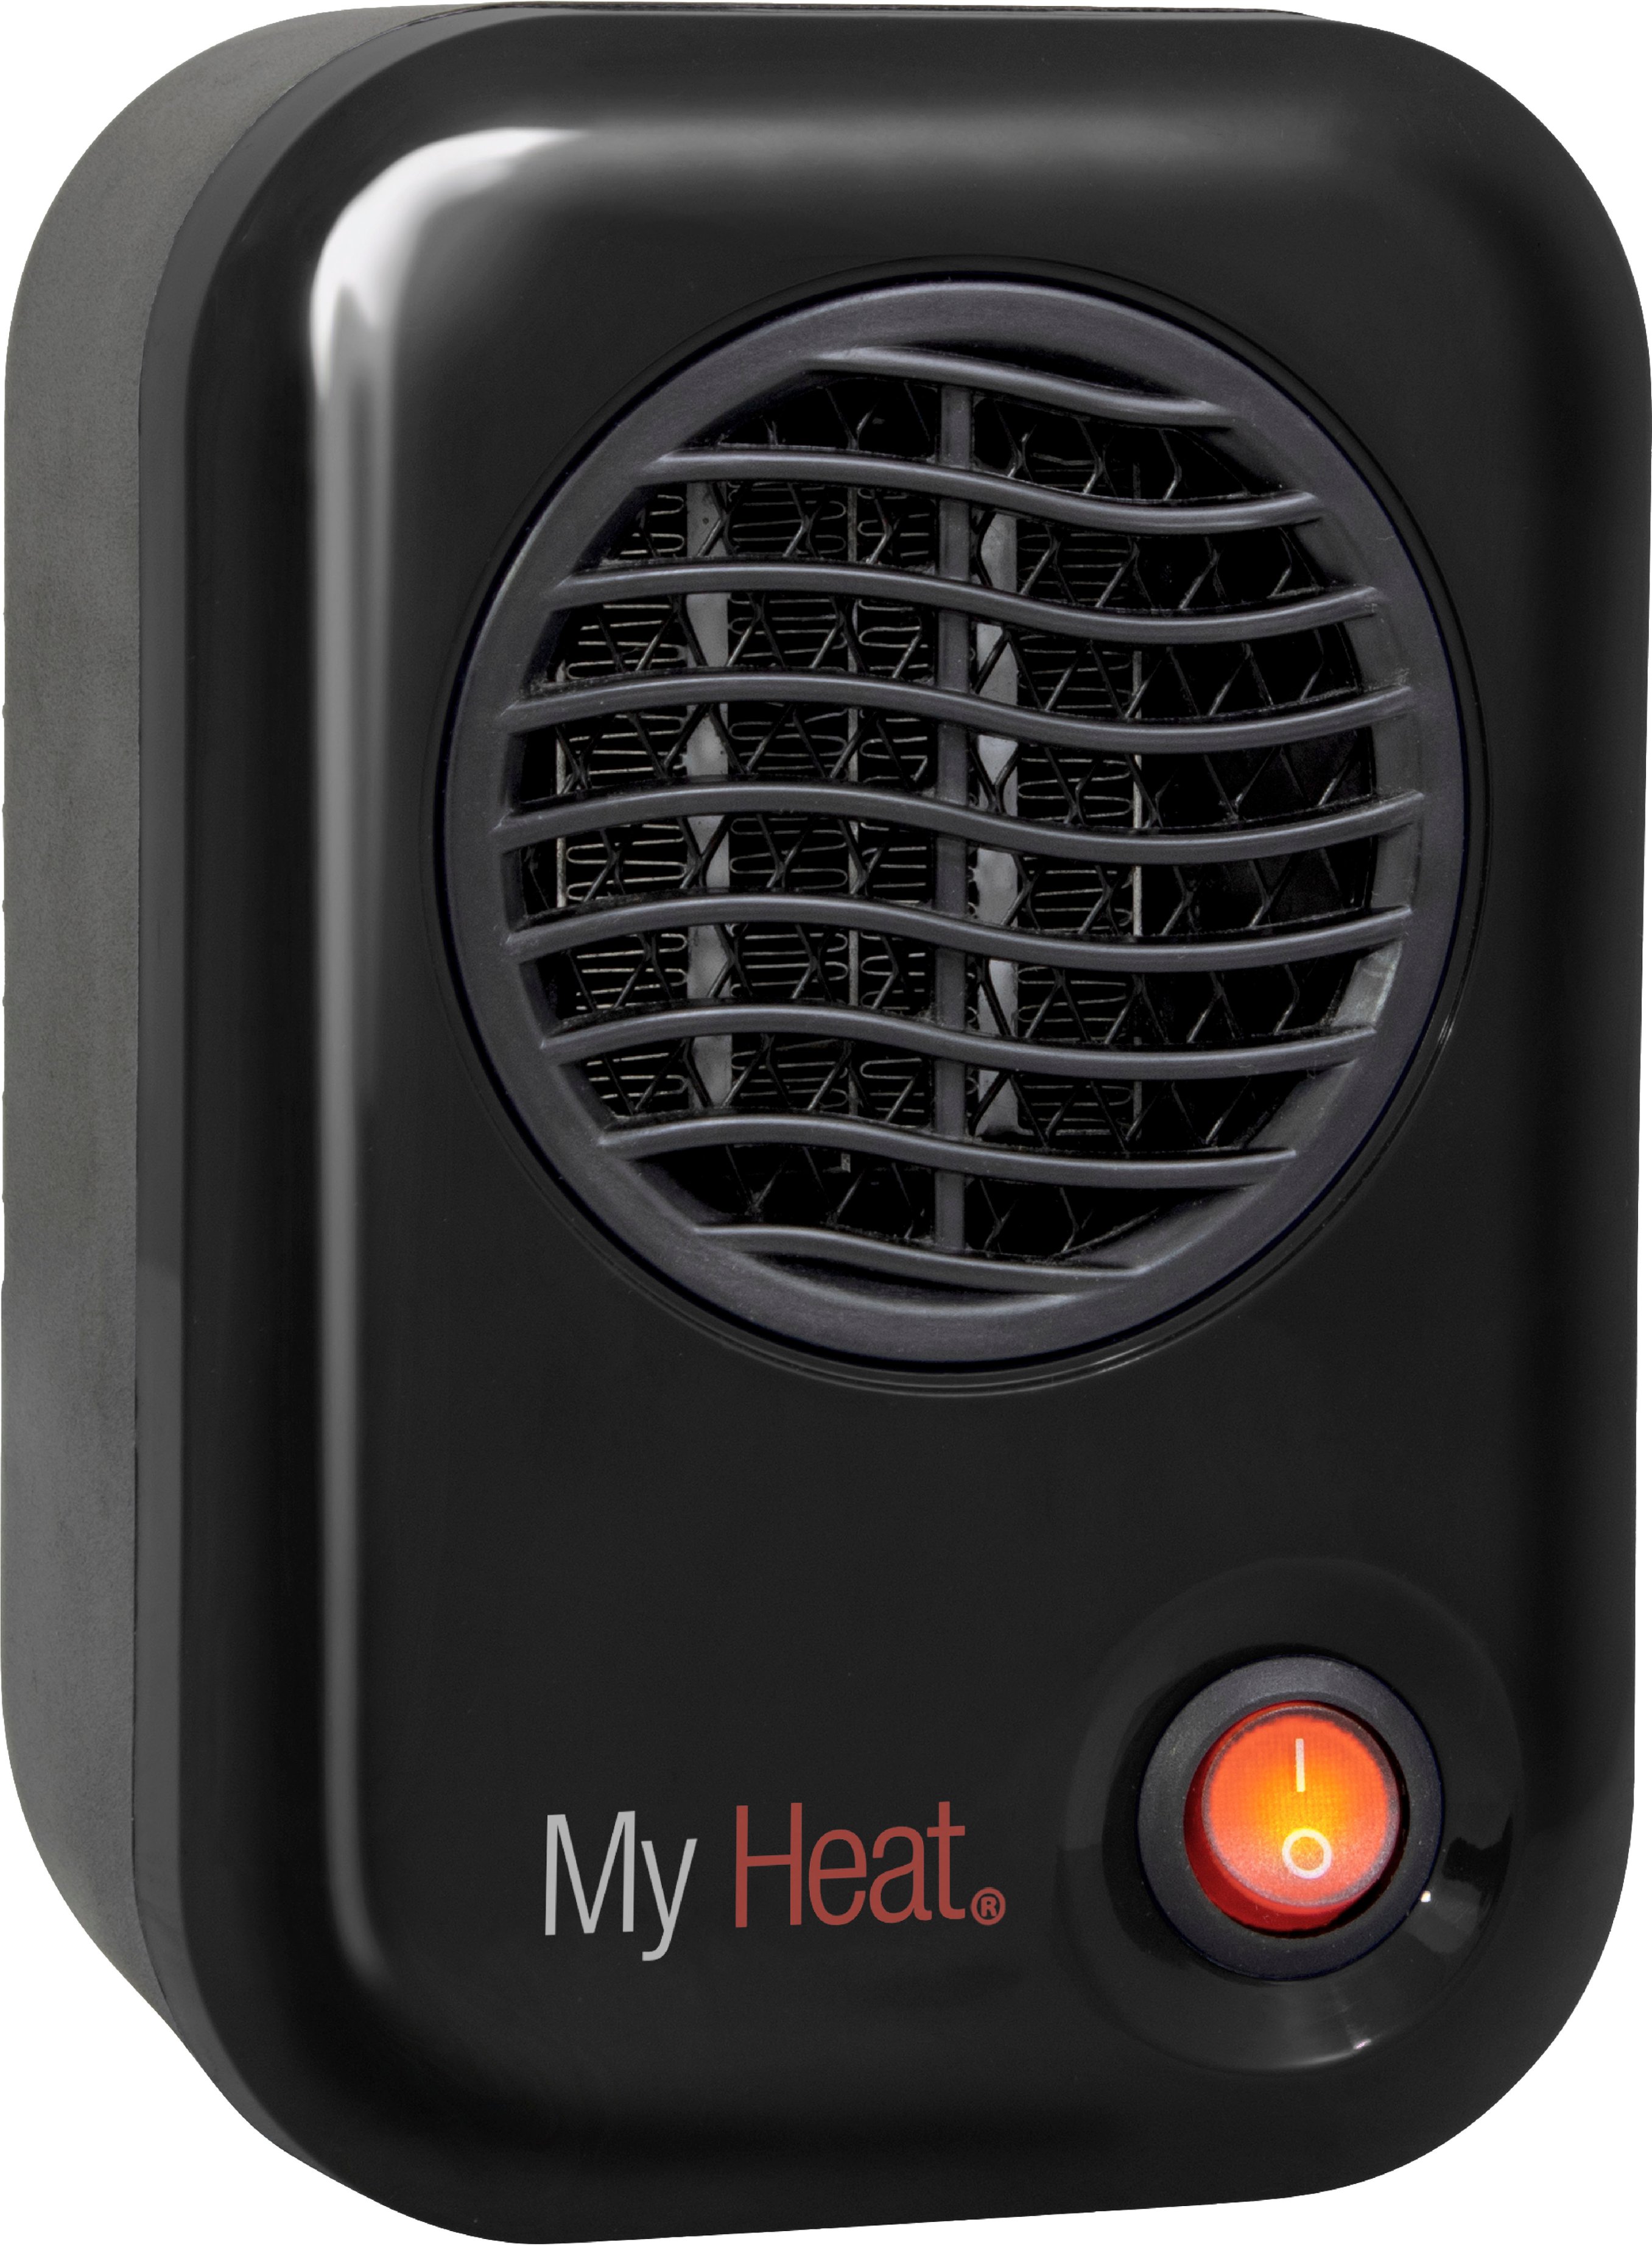 Angle View: Lasko - MyHeat Personal Electric Portable Space Heater - Black